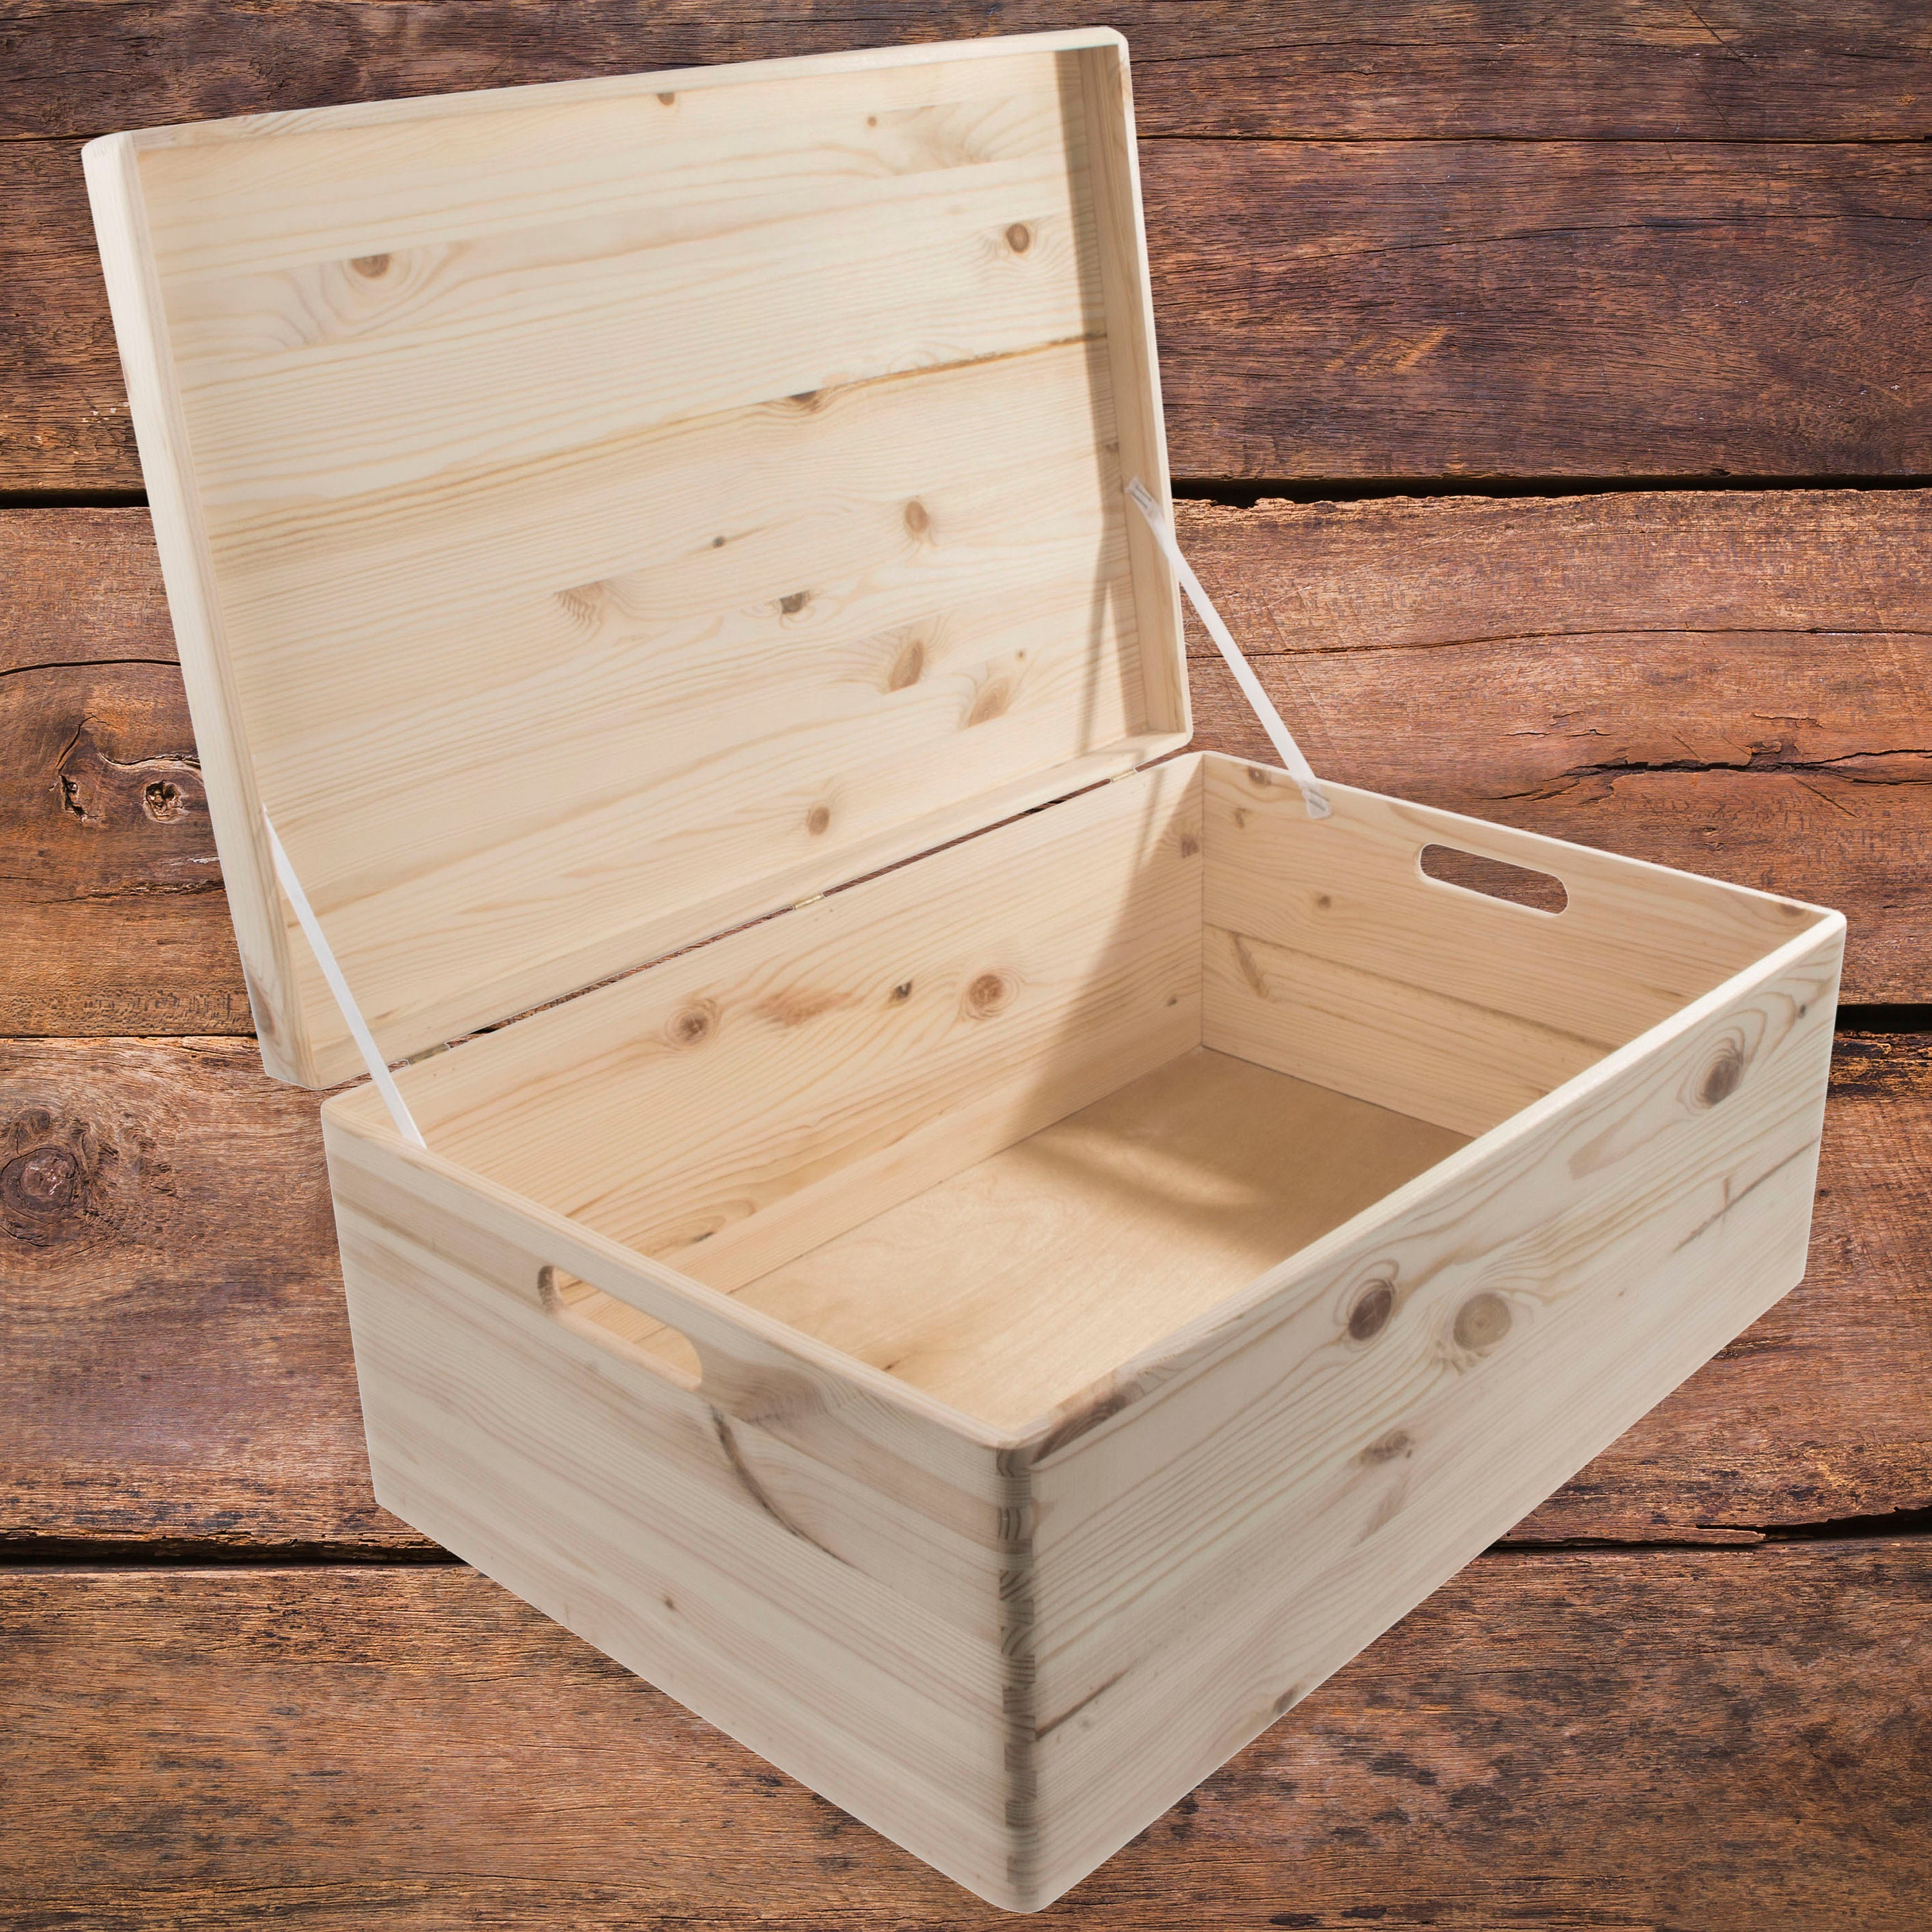 Large Shallow Wooden Storage Box With Hinged Lid & Cut-out Handles Toy Box  Chest Crate Trunk Container Decorative Plain Unpainted Pine 